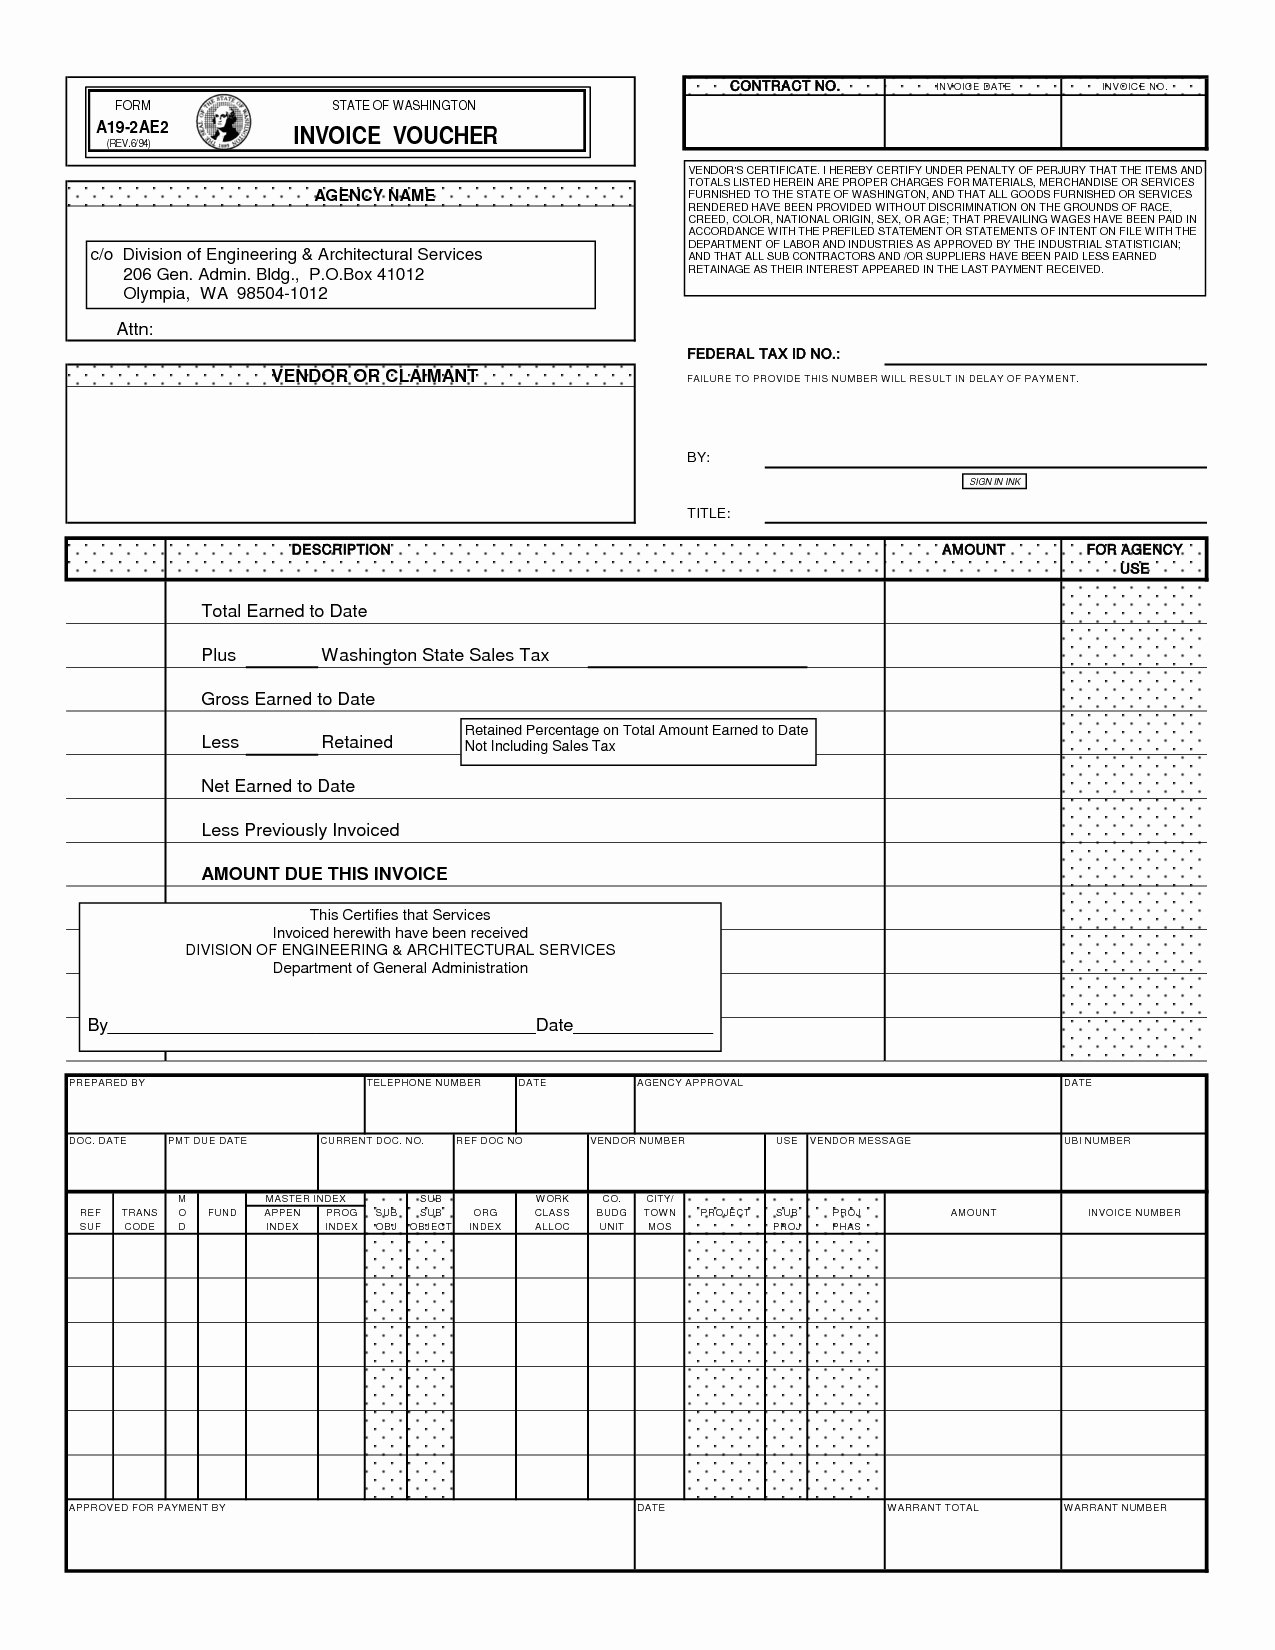 Independent Contractor Invoice Template Luxury Independent Contractor Invoice Invoice Template Ideas